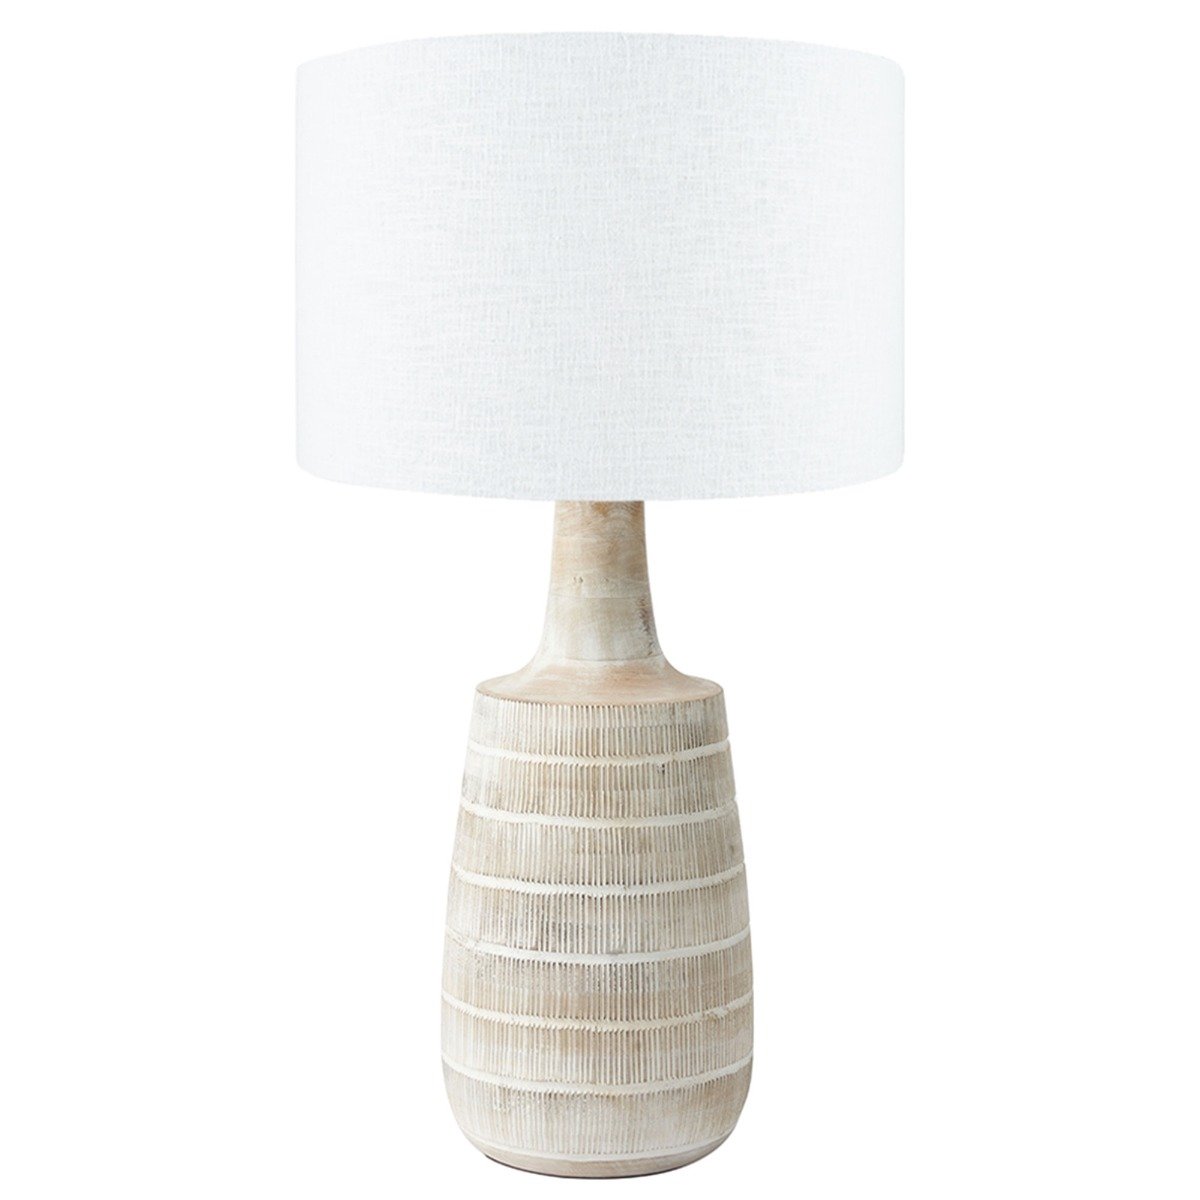 Textured Wood Table Lamp, Neutral | Barker & Stonehouse